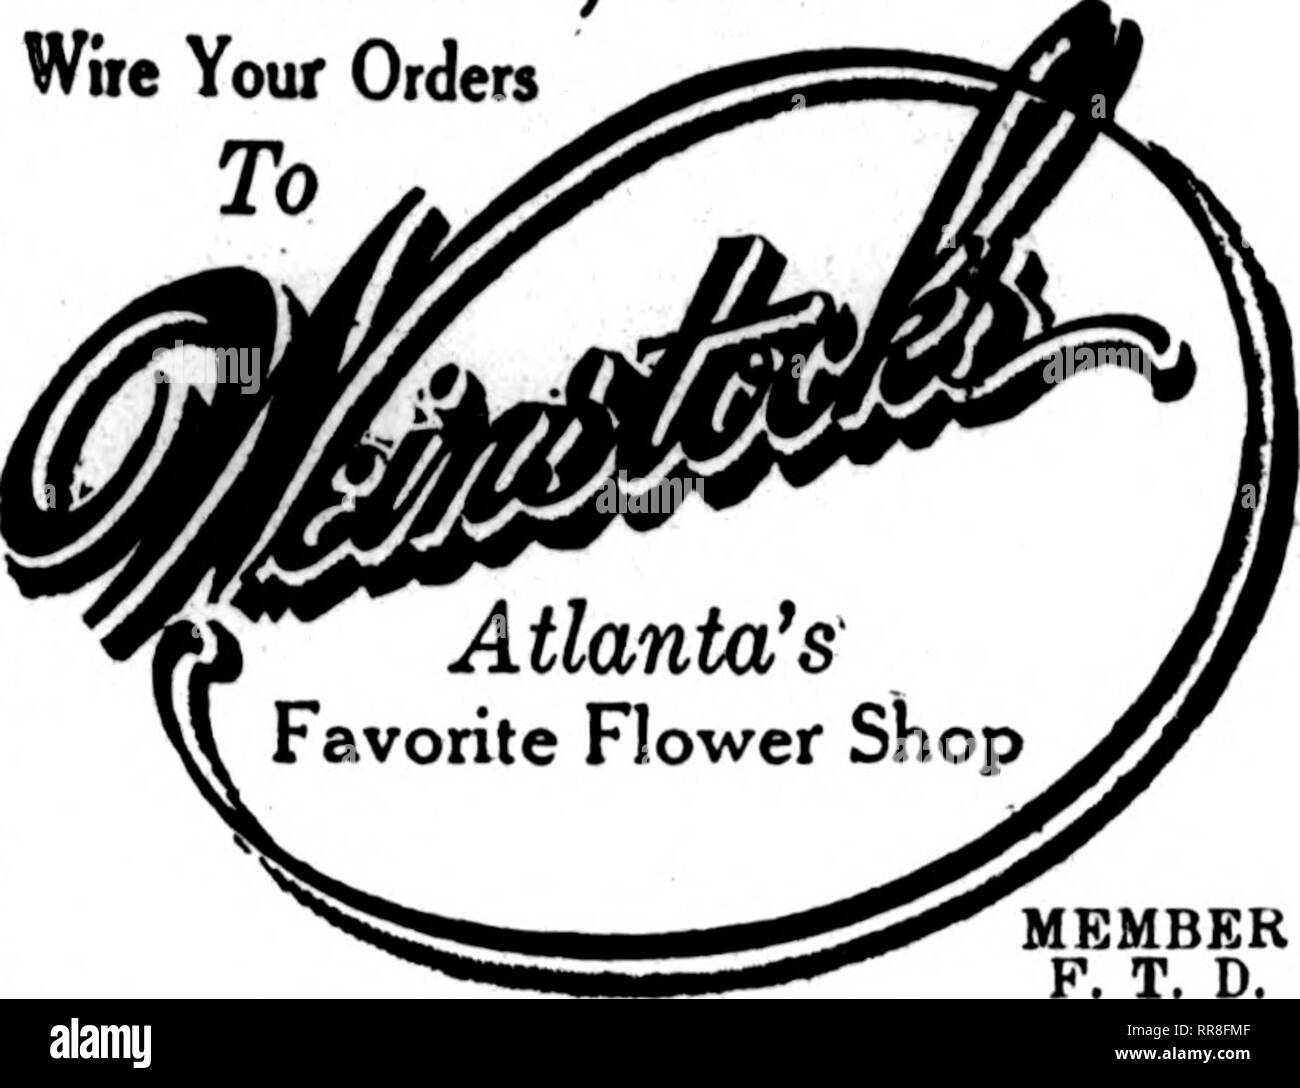 . Florists' review [microform]. Floriculture. FLOWER. SHOP 41 F € cue htree Street Quality 5TTdJer^ice Camden, S. C. AND VICINITY THE CAMDEN FLORAL CO., INC. MEMBER F. T. D. MISSISSIPPI Orders carefully handled by STEMME &amp; SONS HATTIESBURG. MISS. CLARKSDALE, MISS. PAYNE'S FLOWER SHOP Al a. Birmingham, FIVE POINTS, MISS BLACK. Florist priitors (if the IJlossom yhoj), liave rt'- tiinicd frdui tlioir viication tri[), wliich v;is spt nt ;it I'inc View cottiif^c, in tlu' Oziirks. Miss Hciii/.cliiiiuin was in cliarije (liniiiji their absence. They report a (ielifilittill time. The &quot;Say It Stock Photo